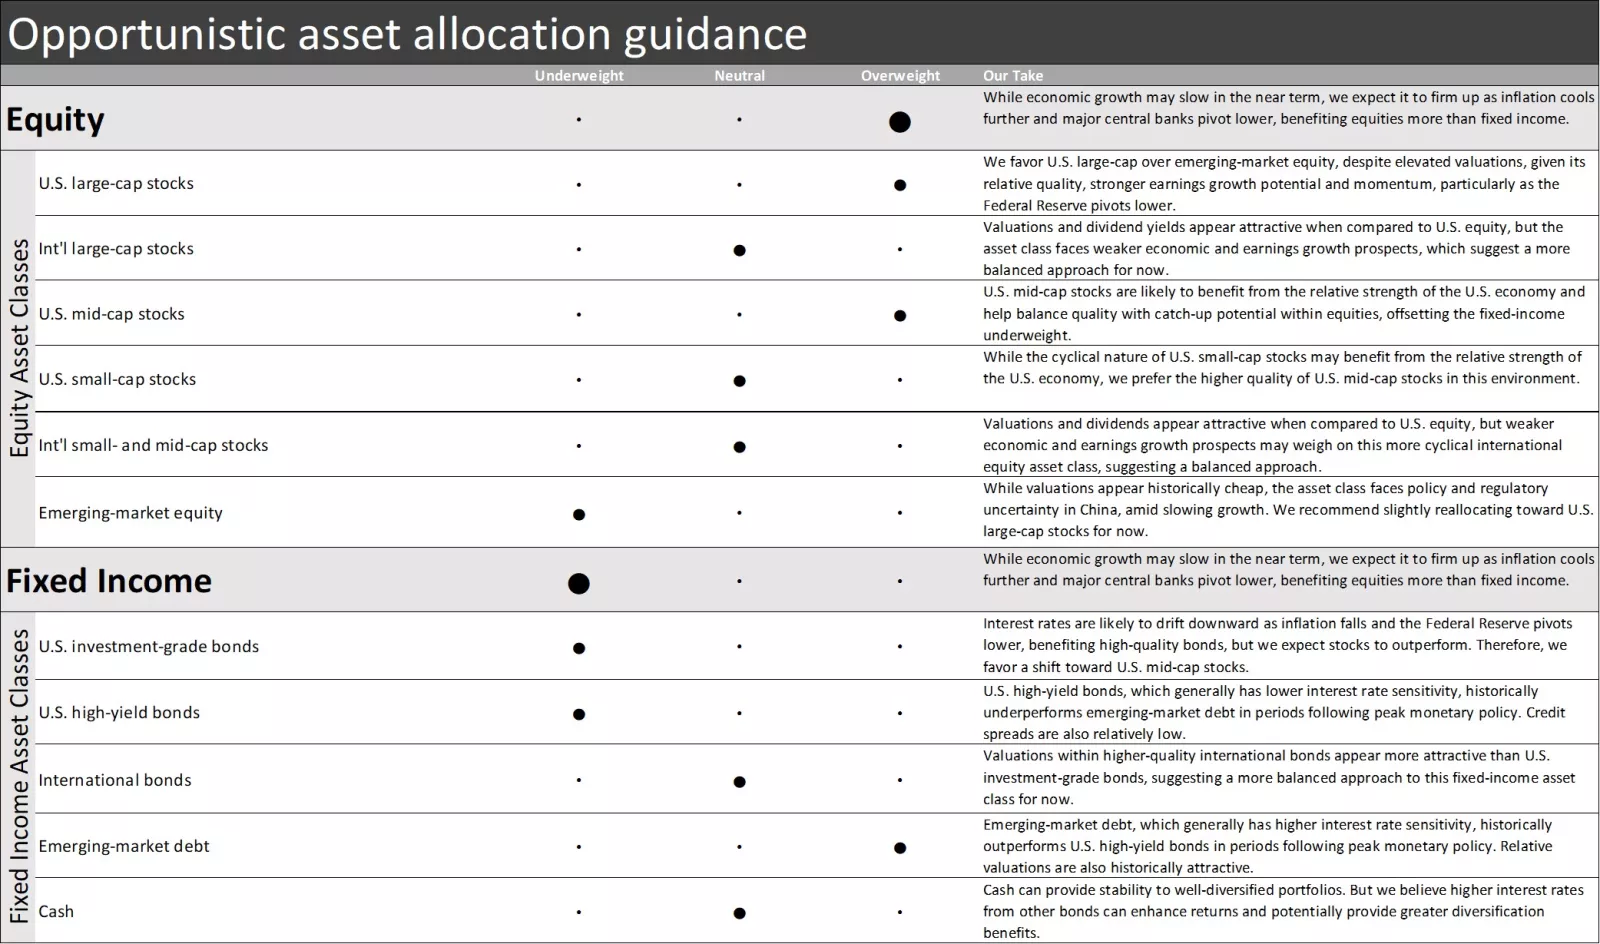  This chart shows the asset allocation guidance for equity and fixed income asset classes.
